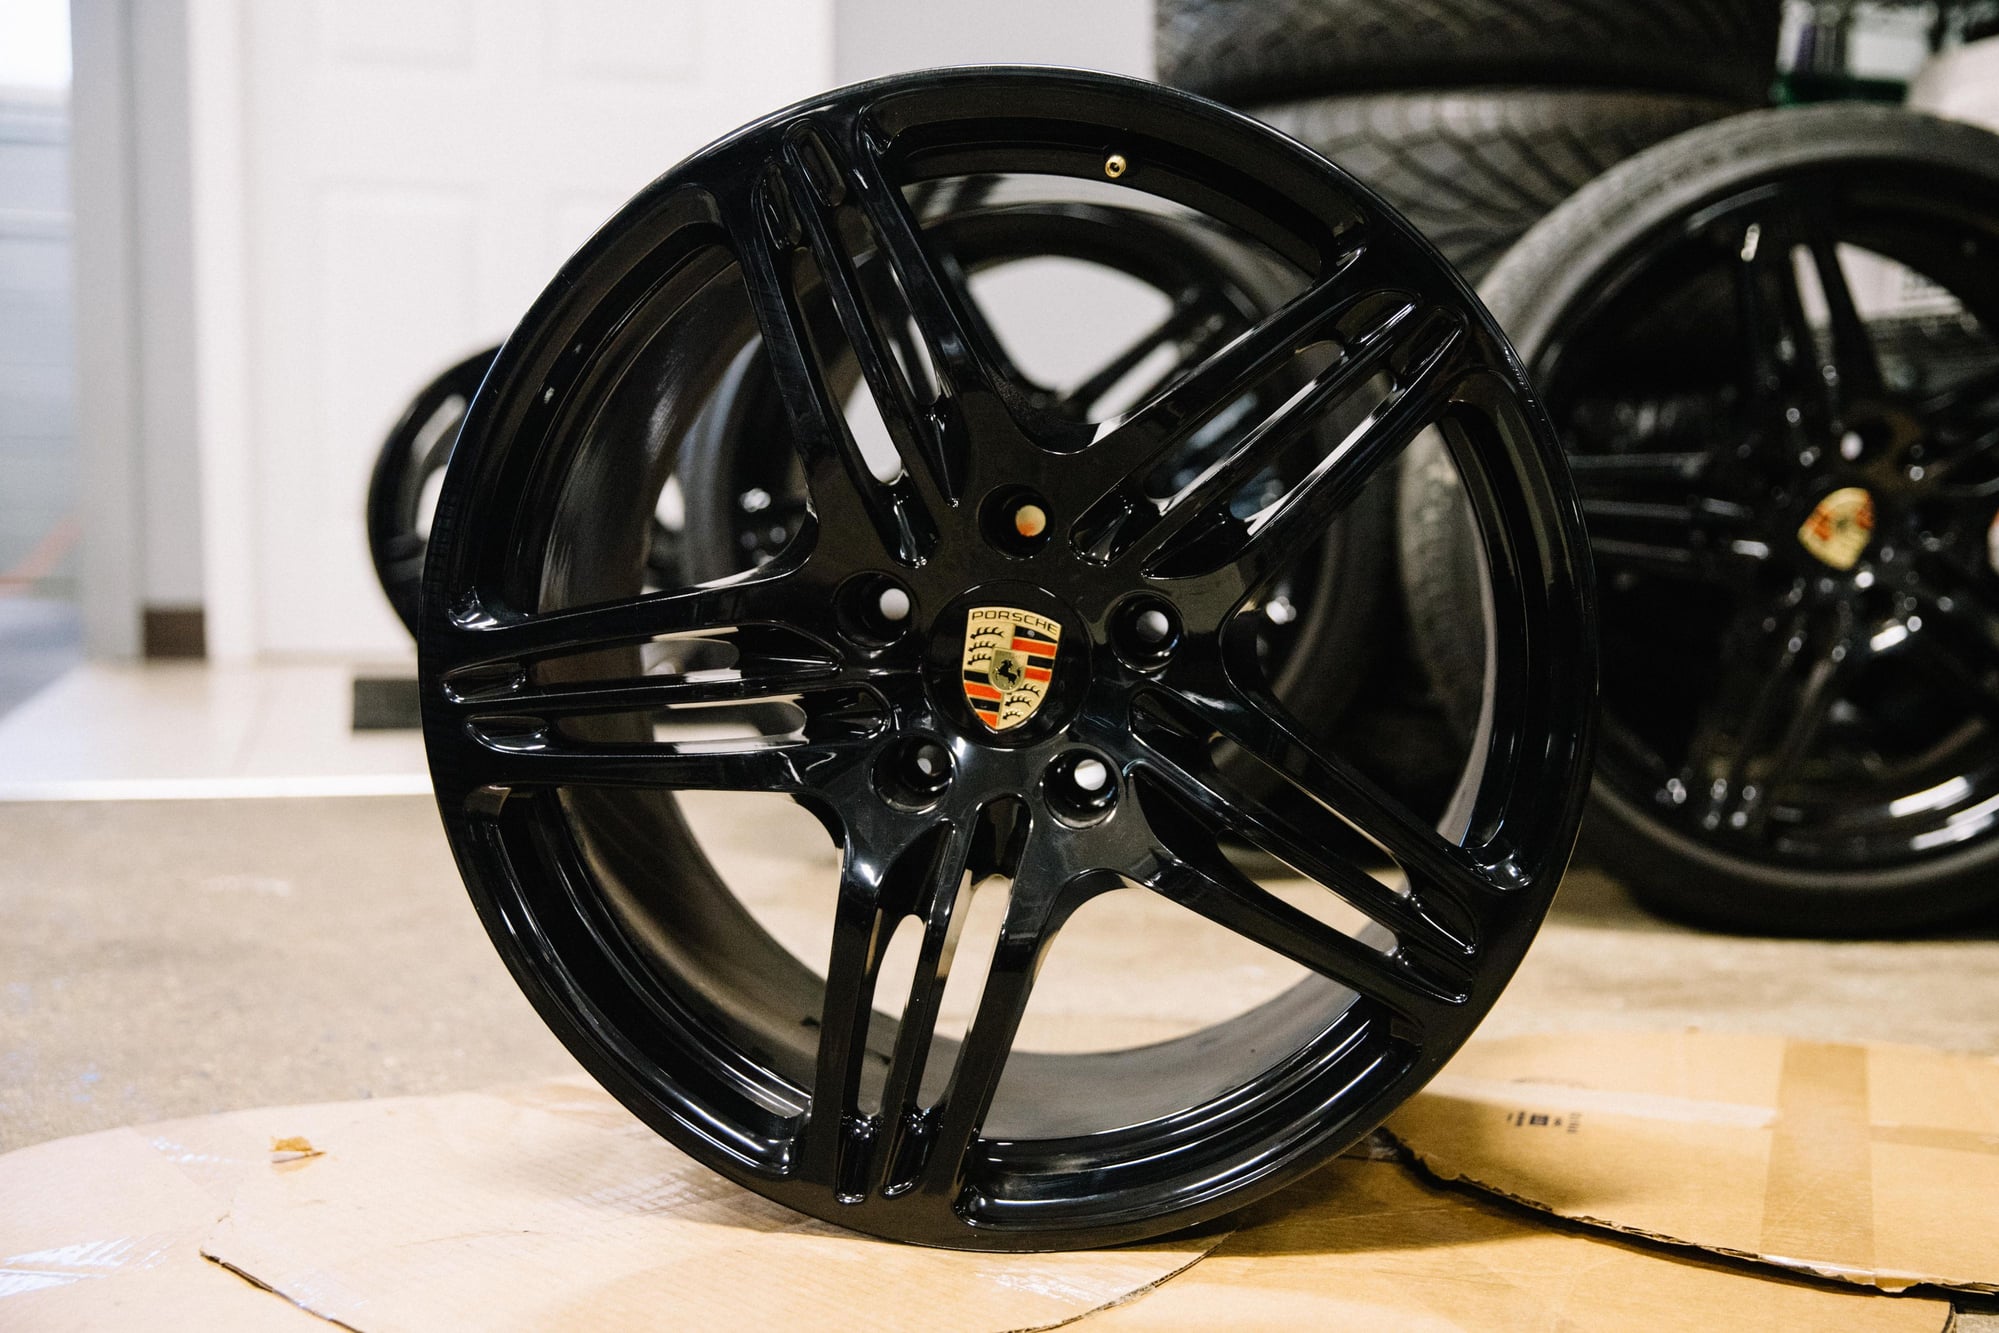 Wheels and Tires/Axles - 19" Porsche 997 911 Turbo Wheels OEM Factory Set in Black - Used - 2005 to 2009 Porsche 911 - 2001 to 2005 Porsche 911 - West Chester, PA 19382, United States